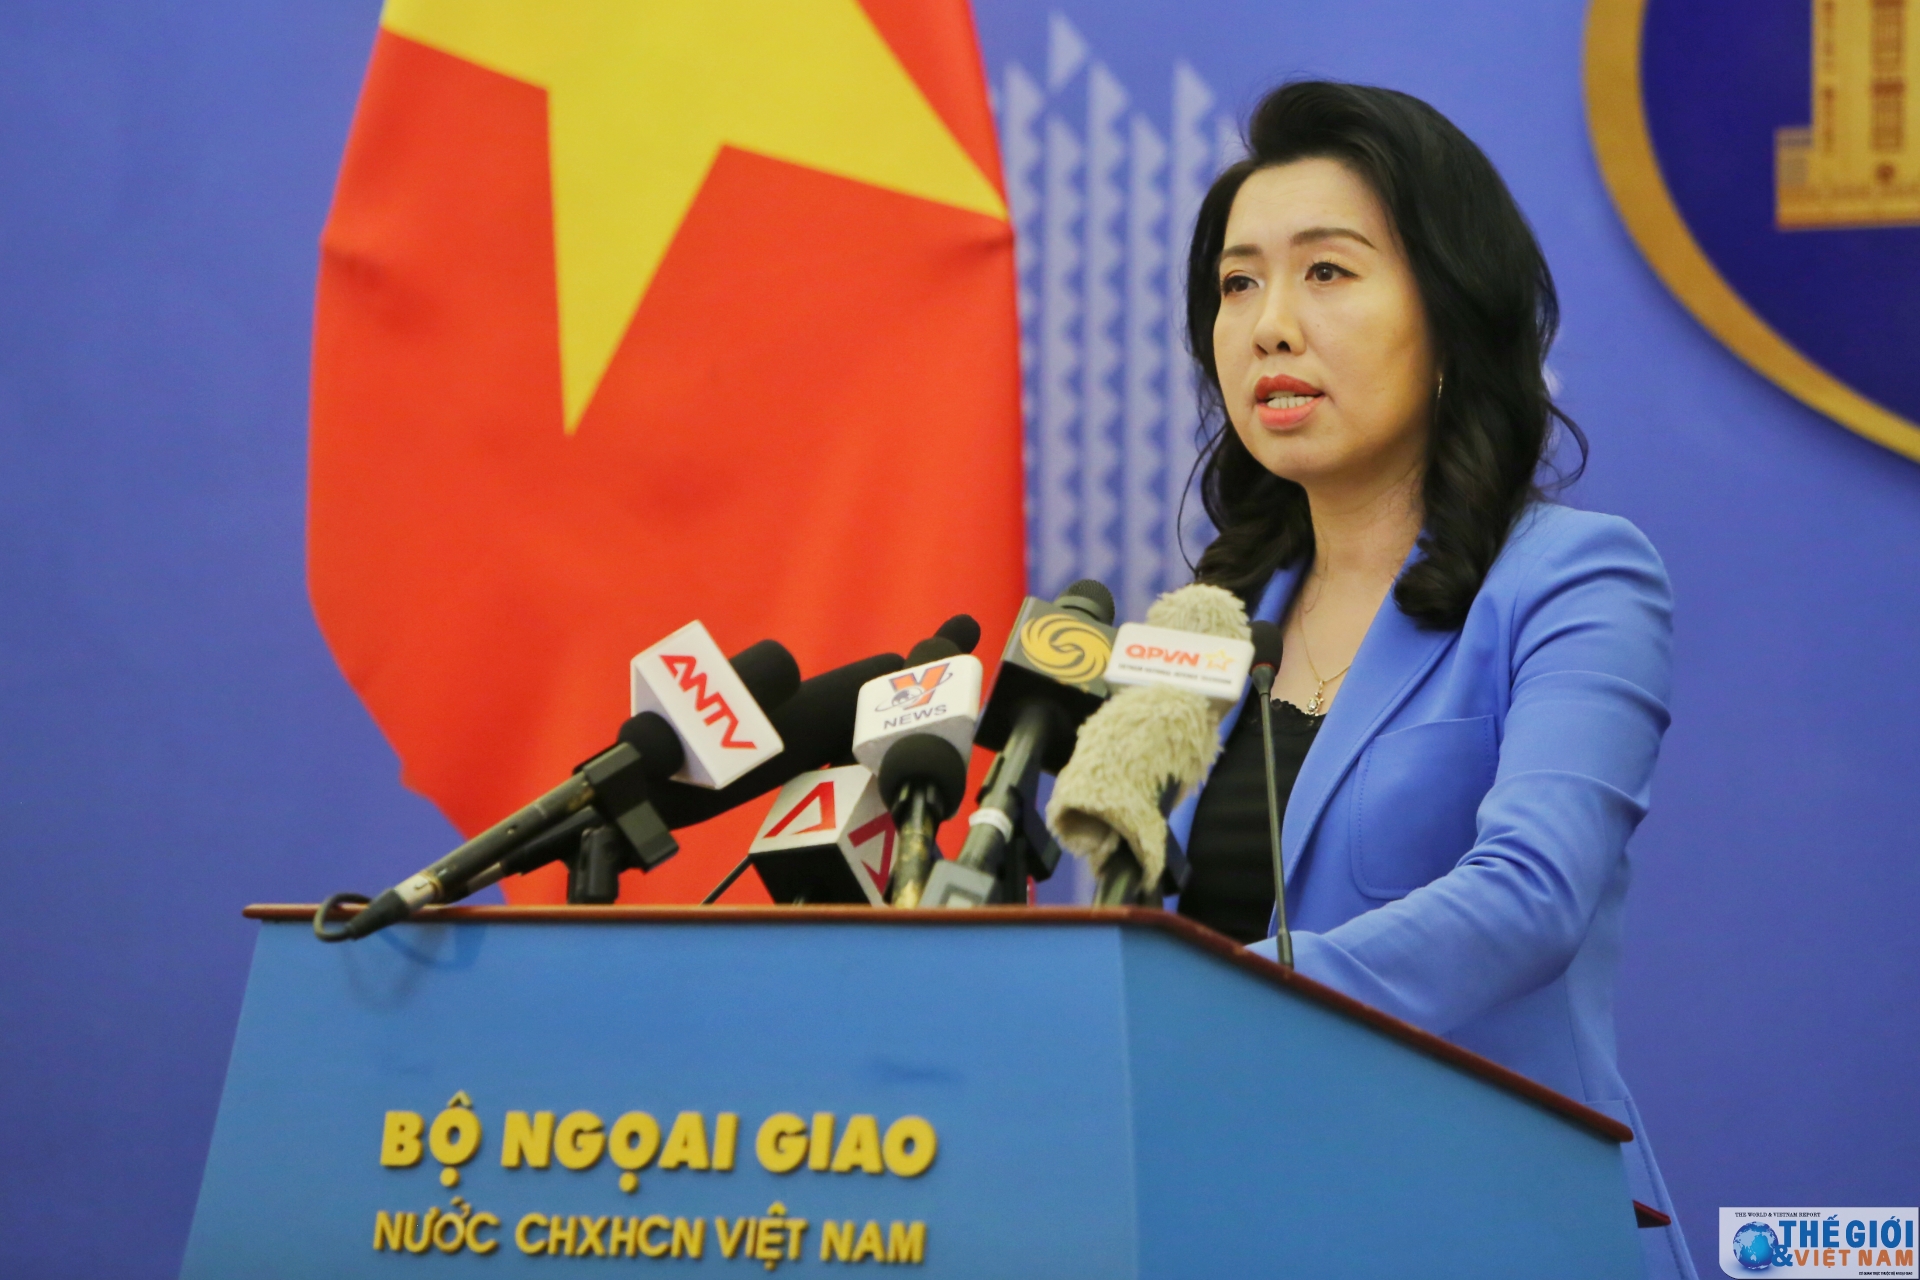 vietnam demands china to withdraw ships from its territorial waters